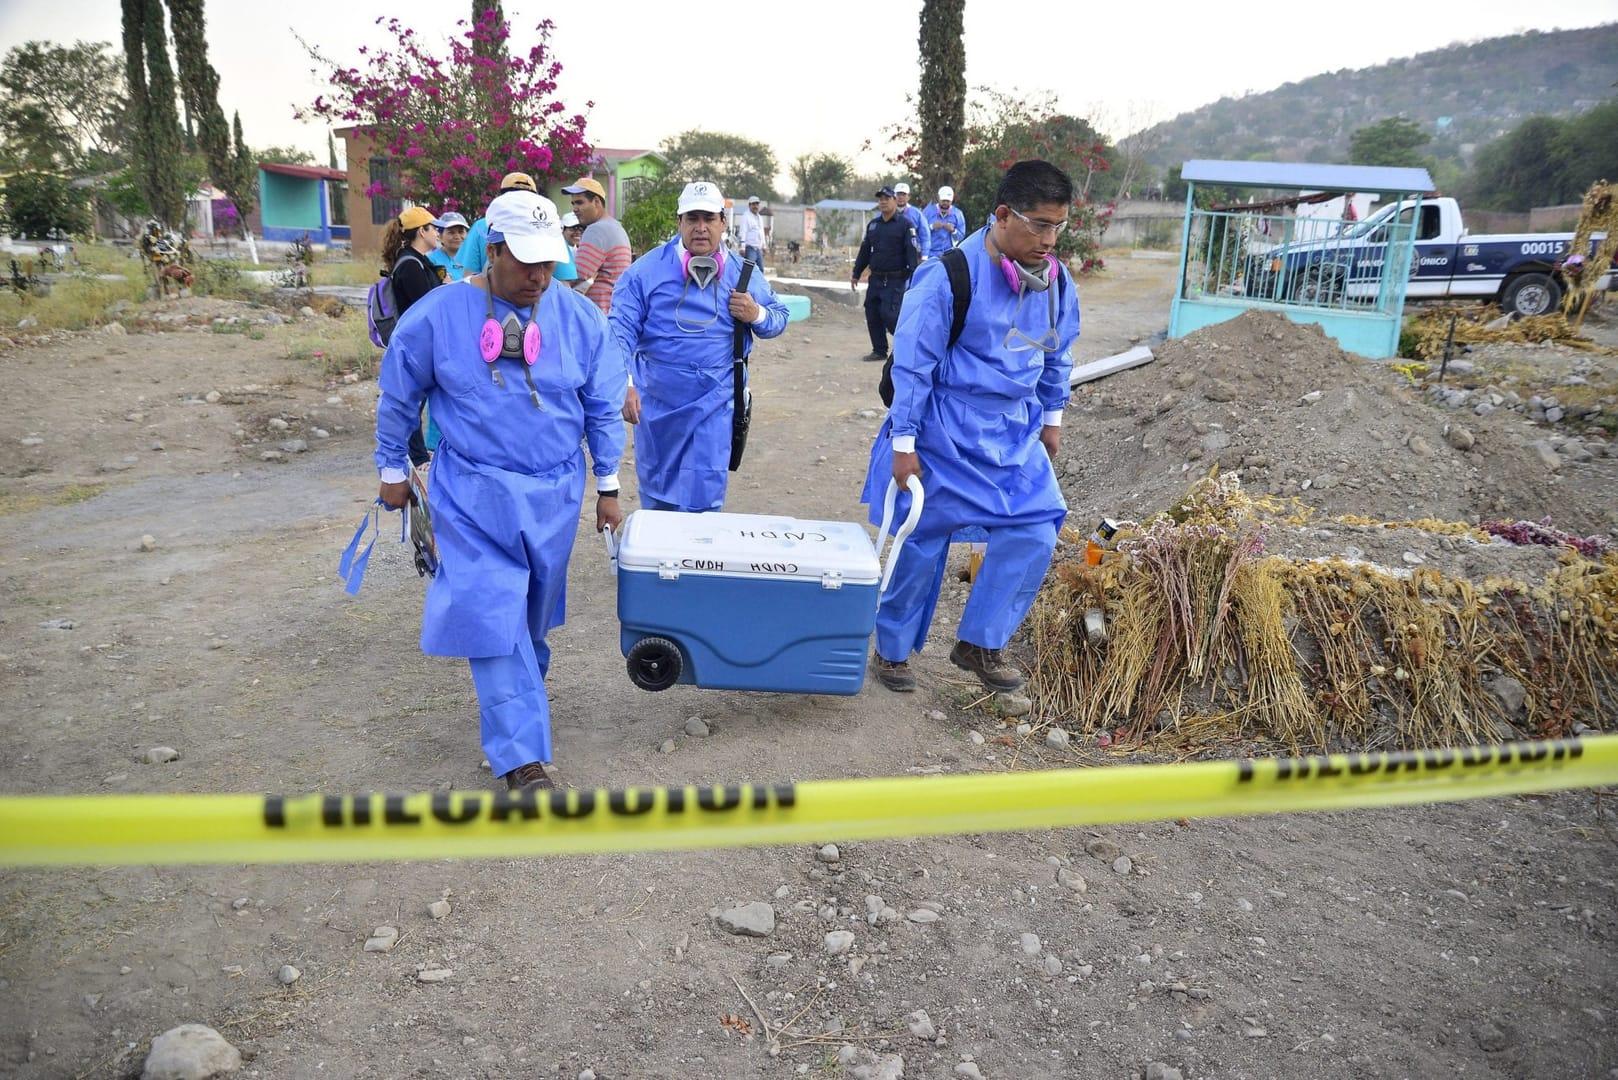 Mexican bishops call for action on missing persons, mass graves